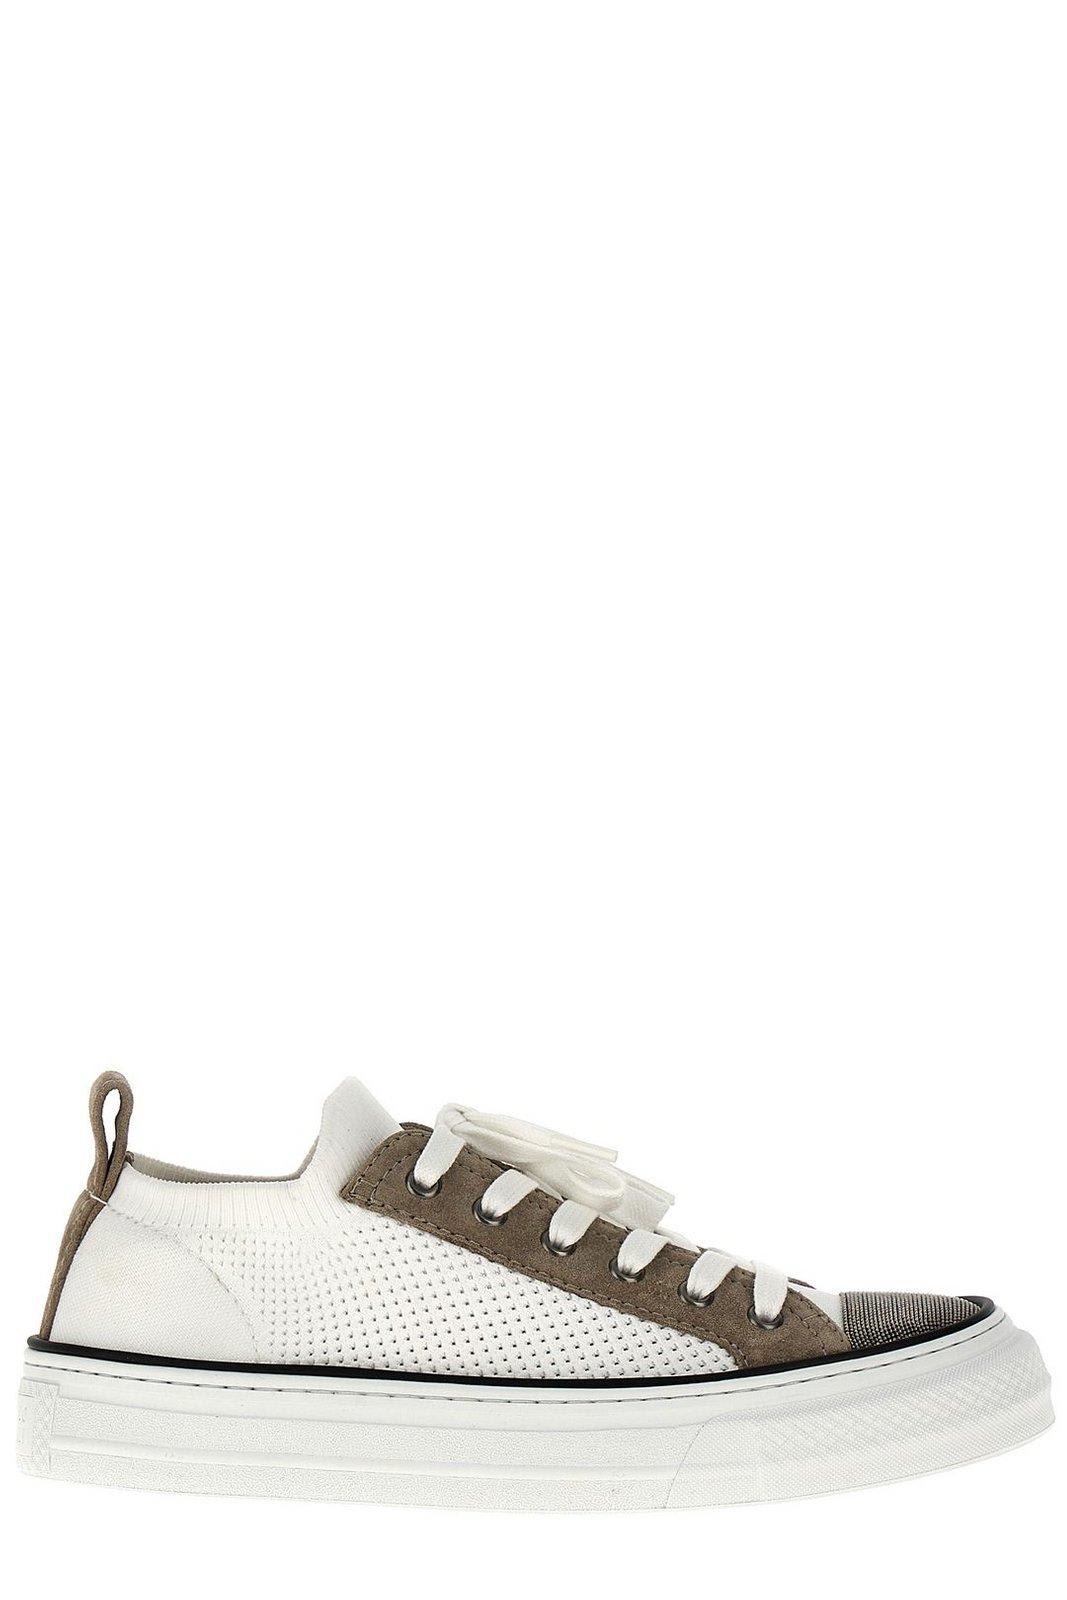 BRUNELLO CUCINELLI MONILI-DETAILED PANELED LACE-UP SNEAKERS